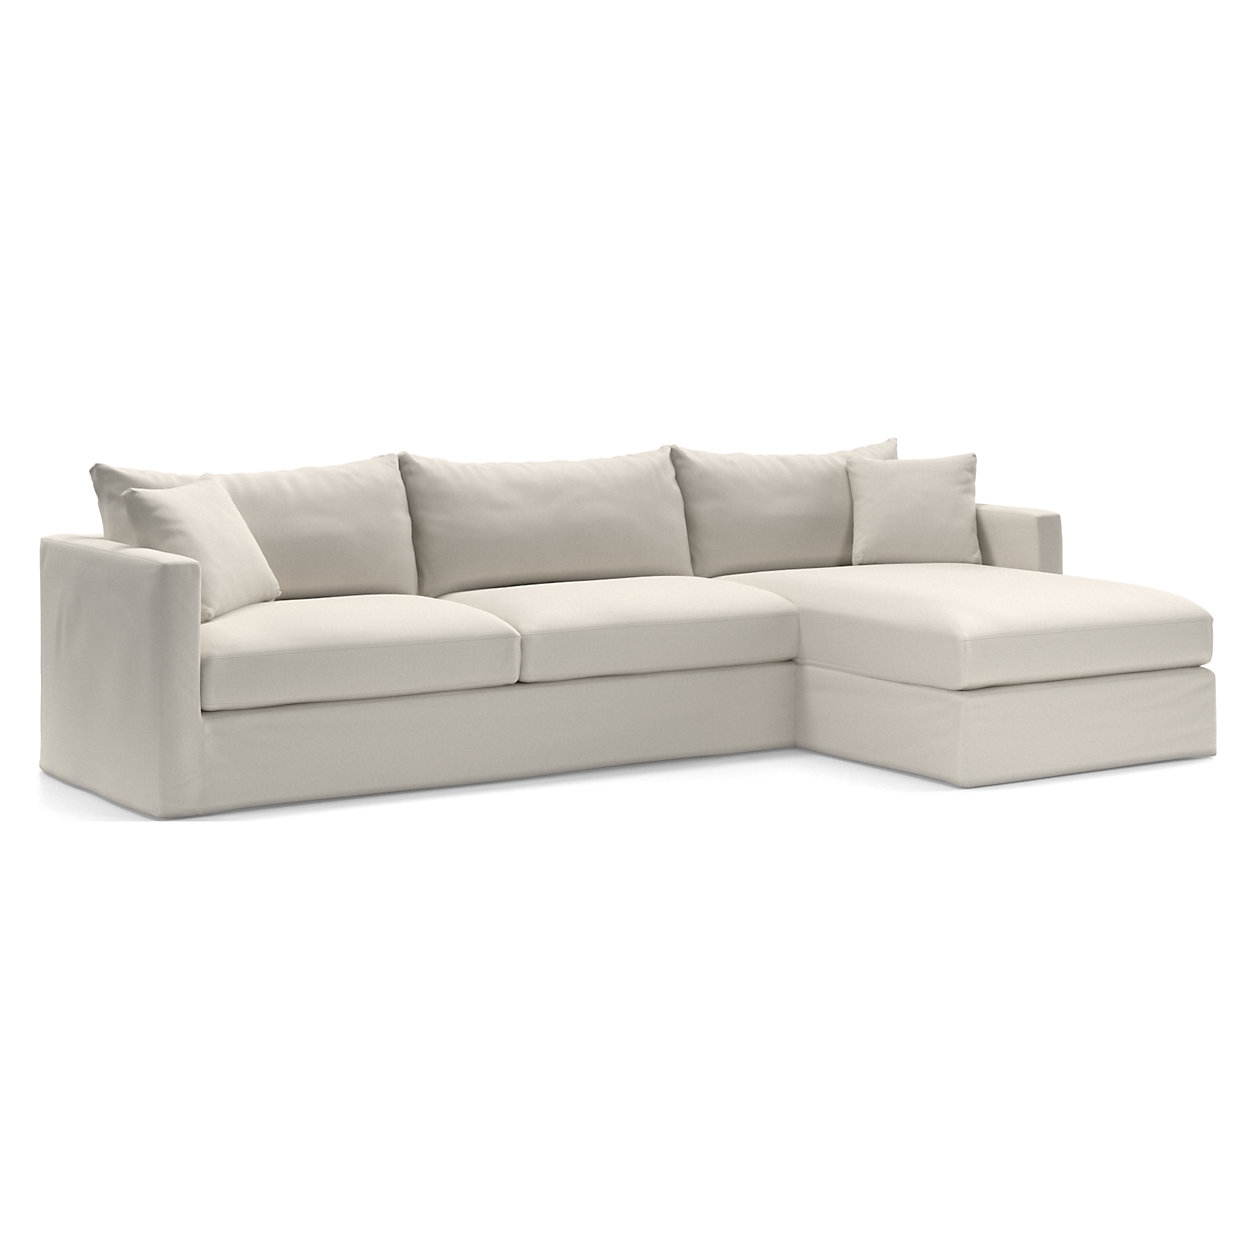 Willow II Slipcovered 2-Piece Right-Arm Chaise Sectional Sofa - Image 0